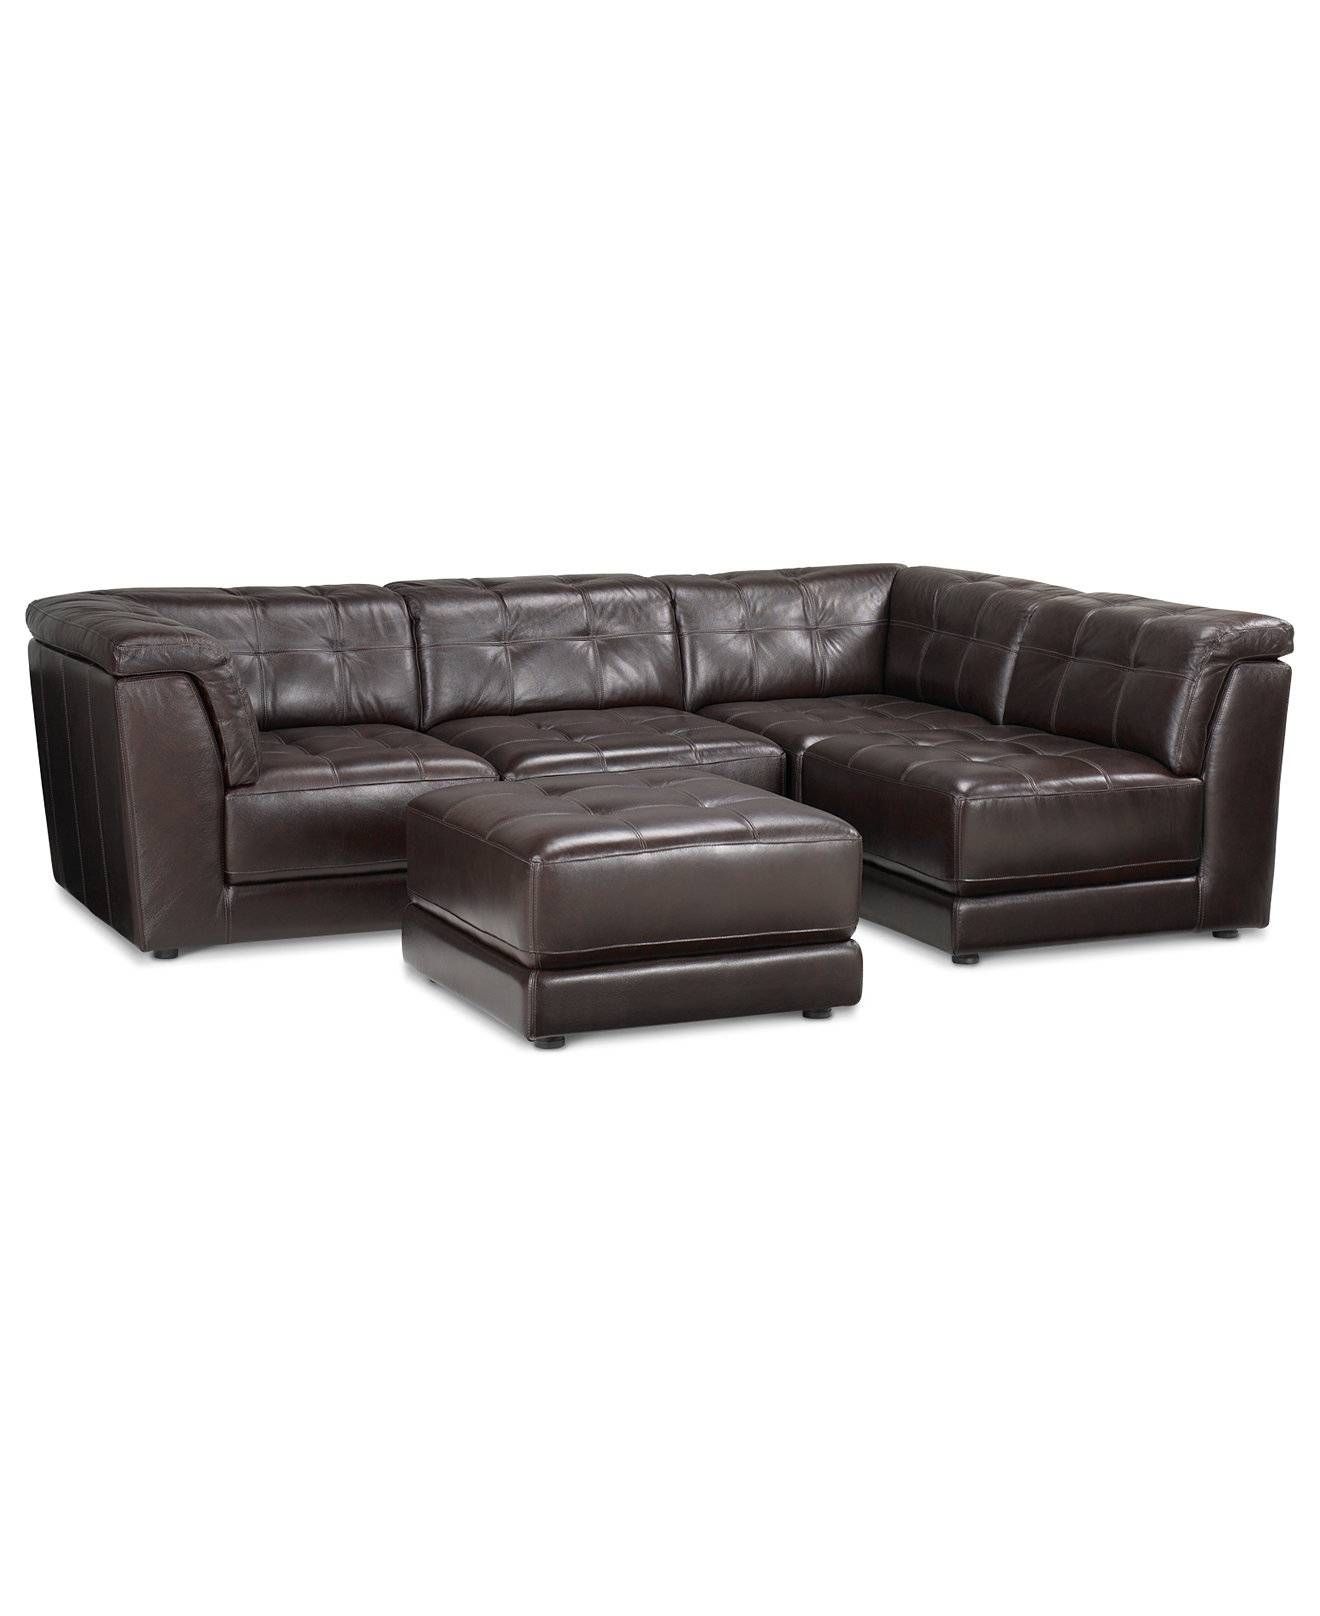 Sofas Center : Macys Leather Sofas For Salemacys Power Motion Intended For Macys Leather Sofas Sectionals (View 21 of 25)